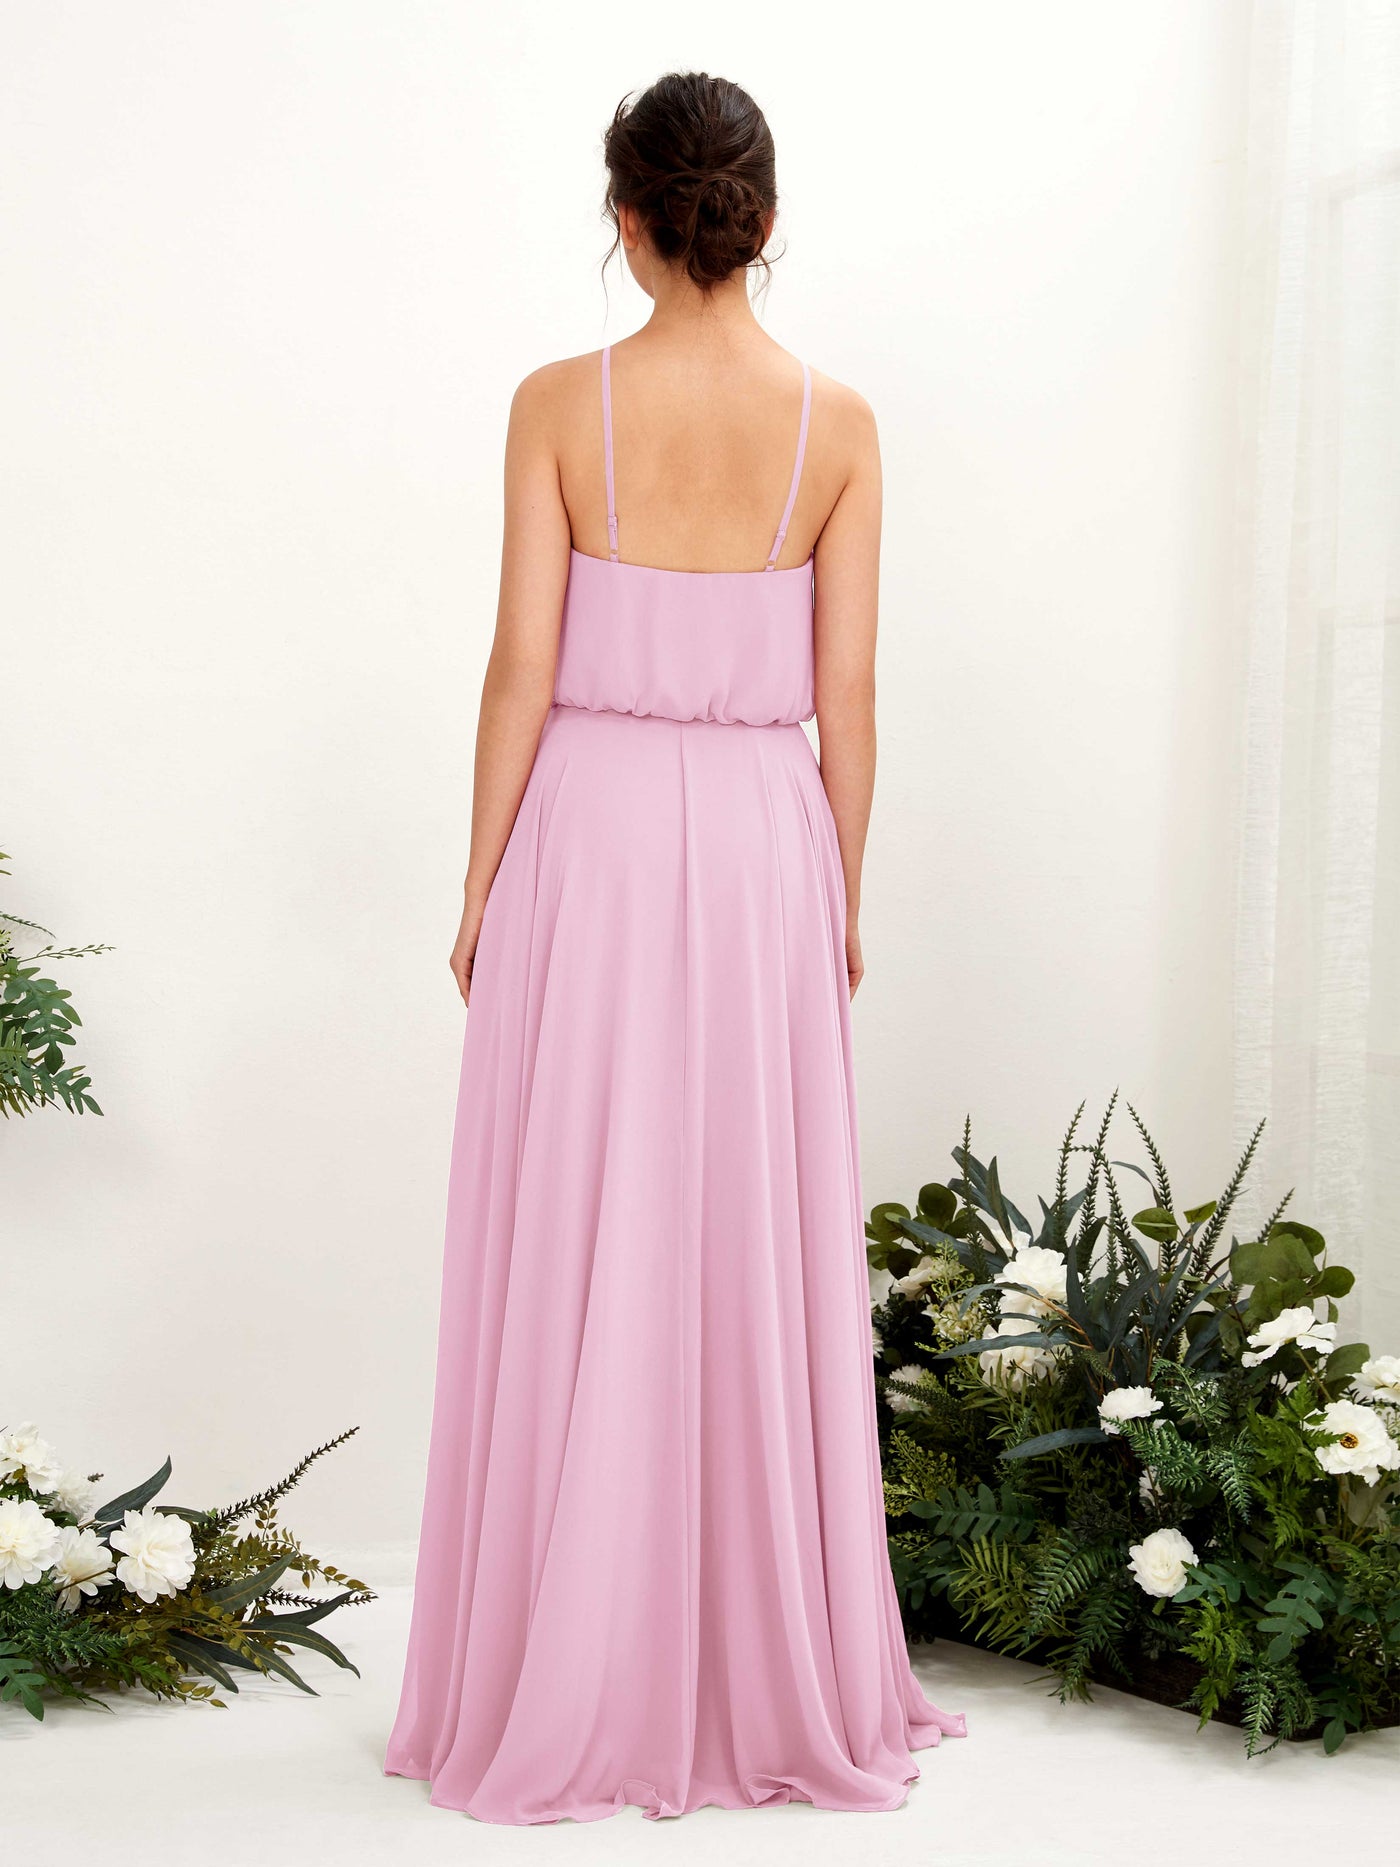 Candy Pink Bridesmaid Dresses Bridesmaid Dress Ball Gown Chiffon Halter Full Length Sleeveless Wedding Party Dress (81223439)#color_candy-pink